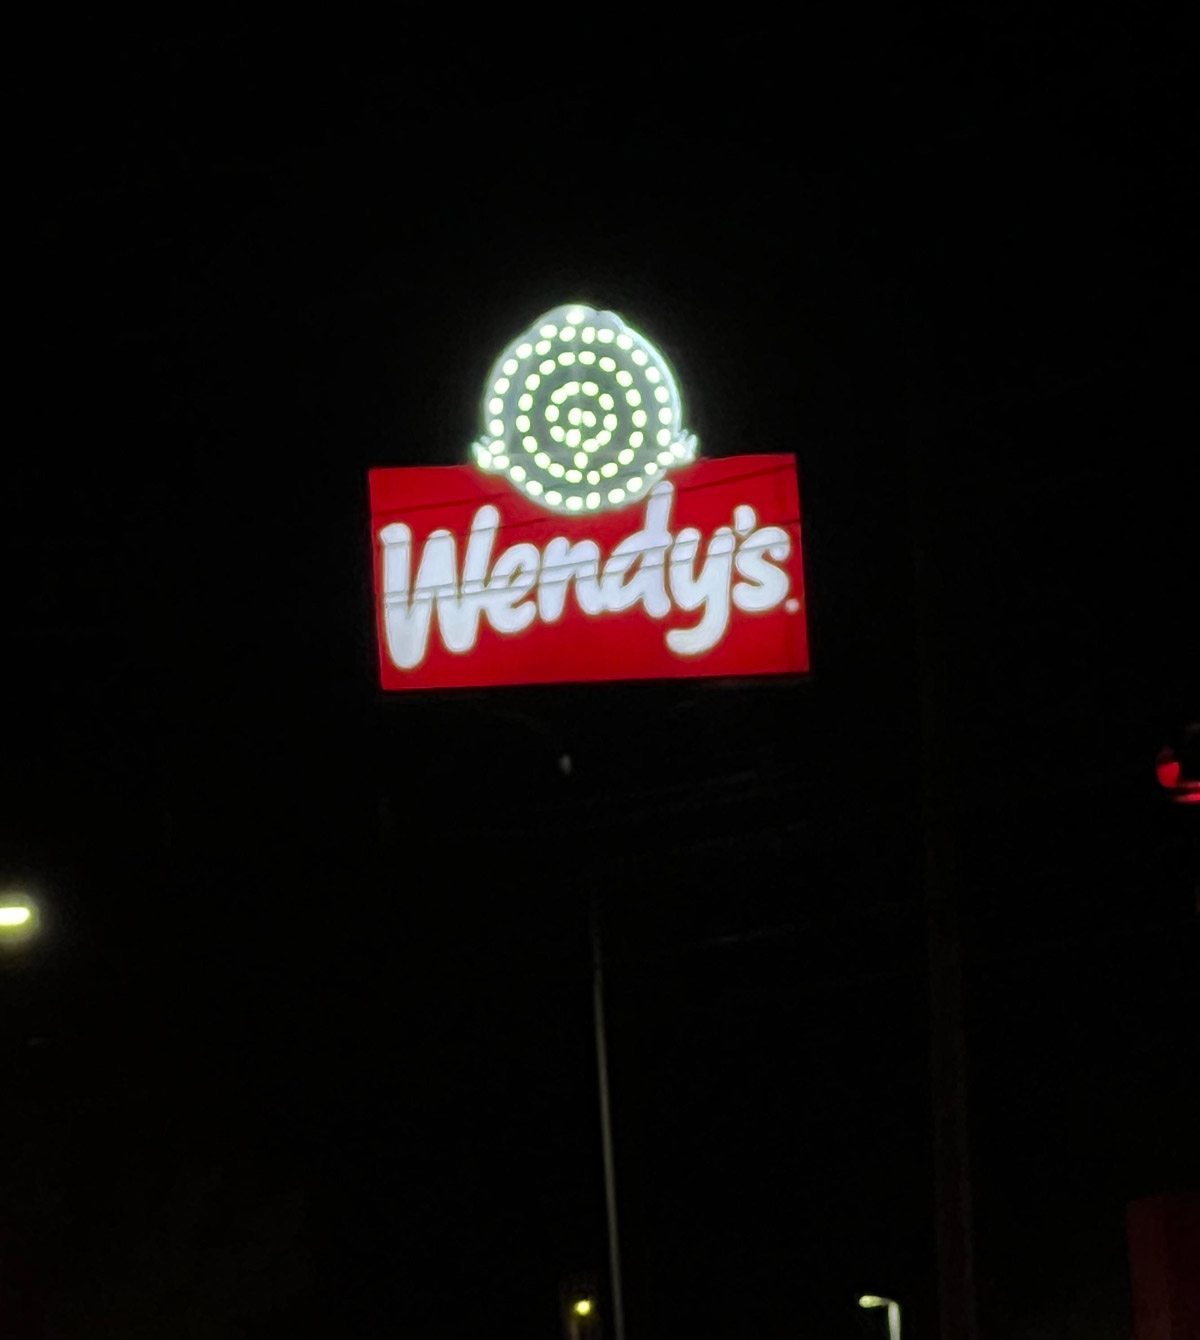 Wendy fell off the sign at my local Wendy's